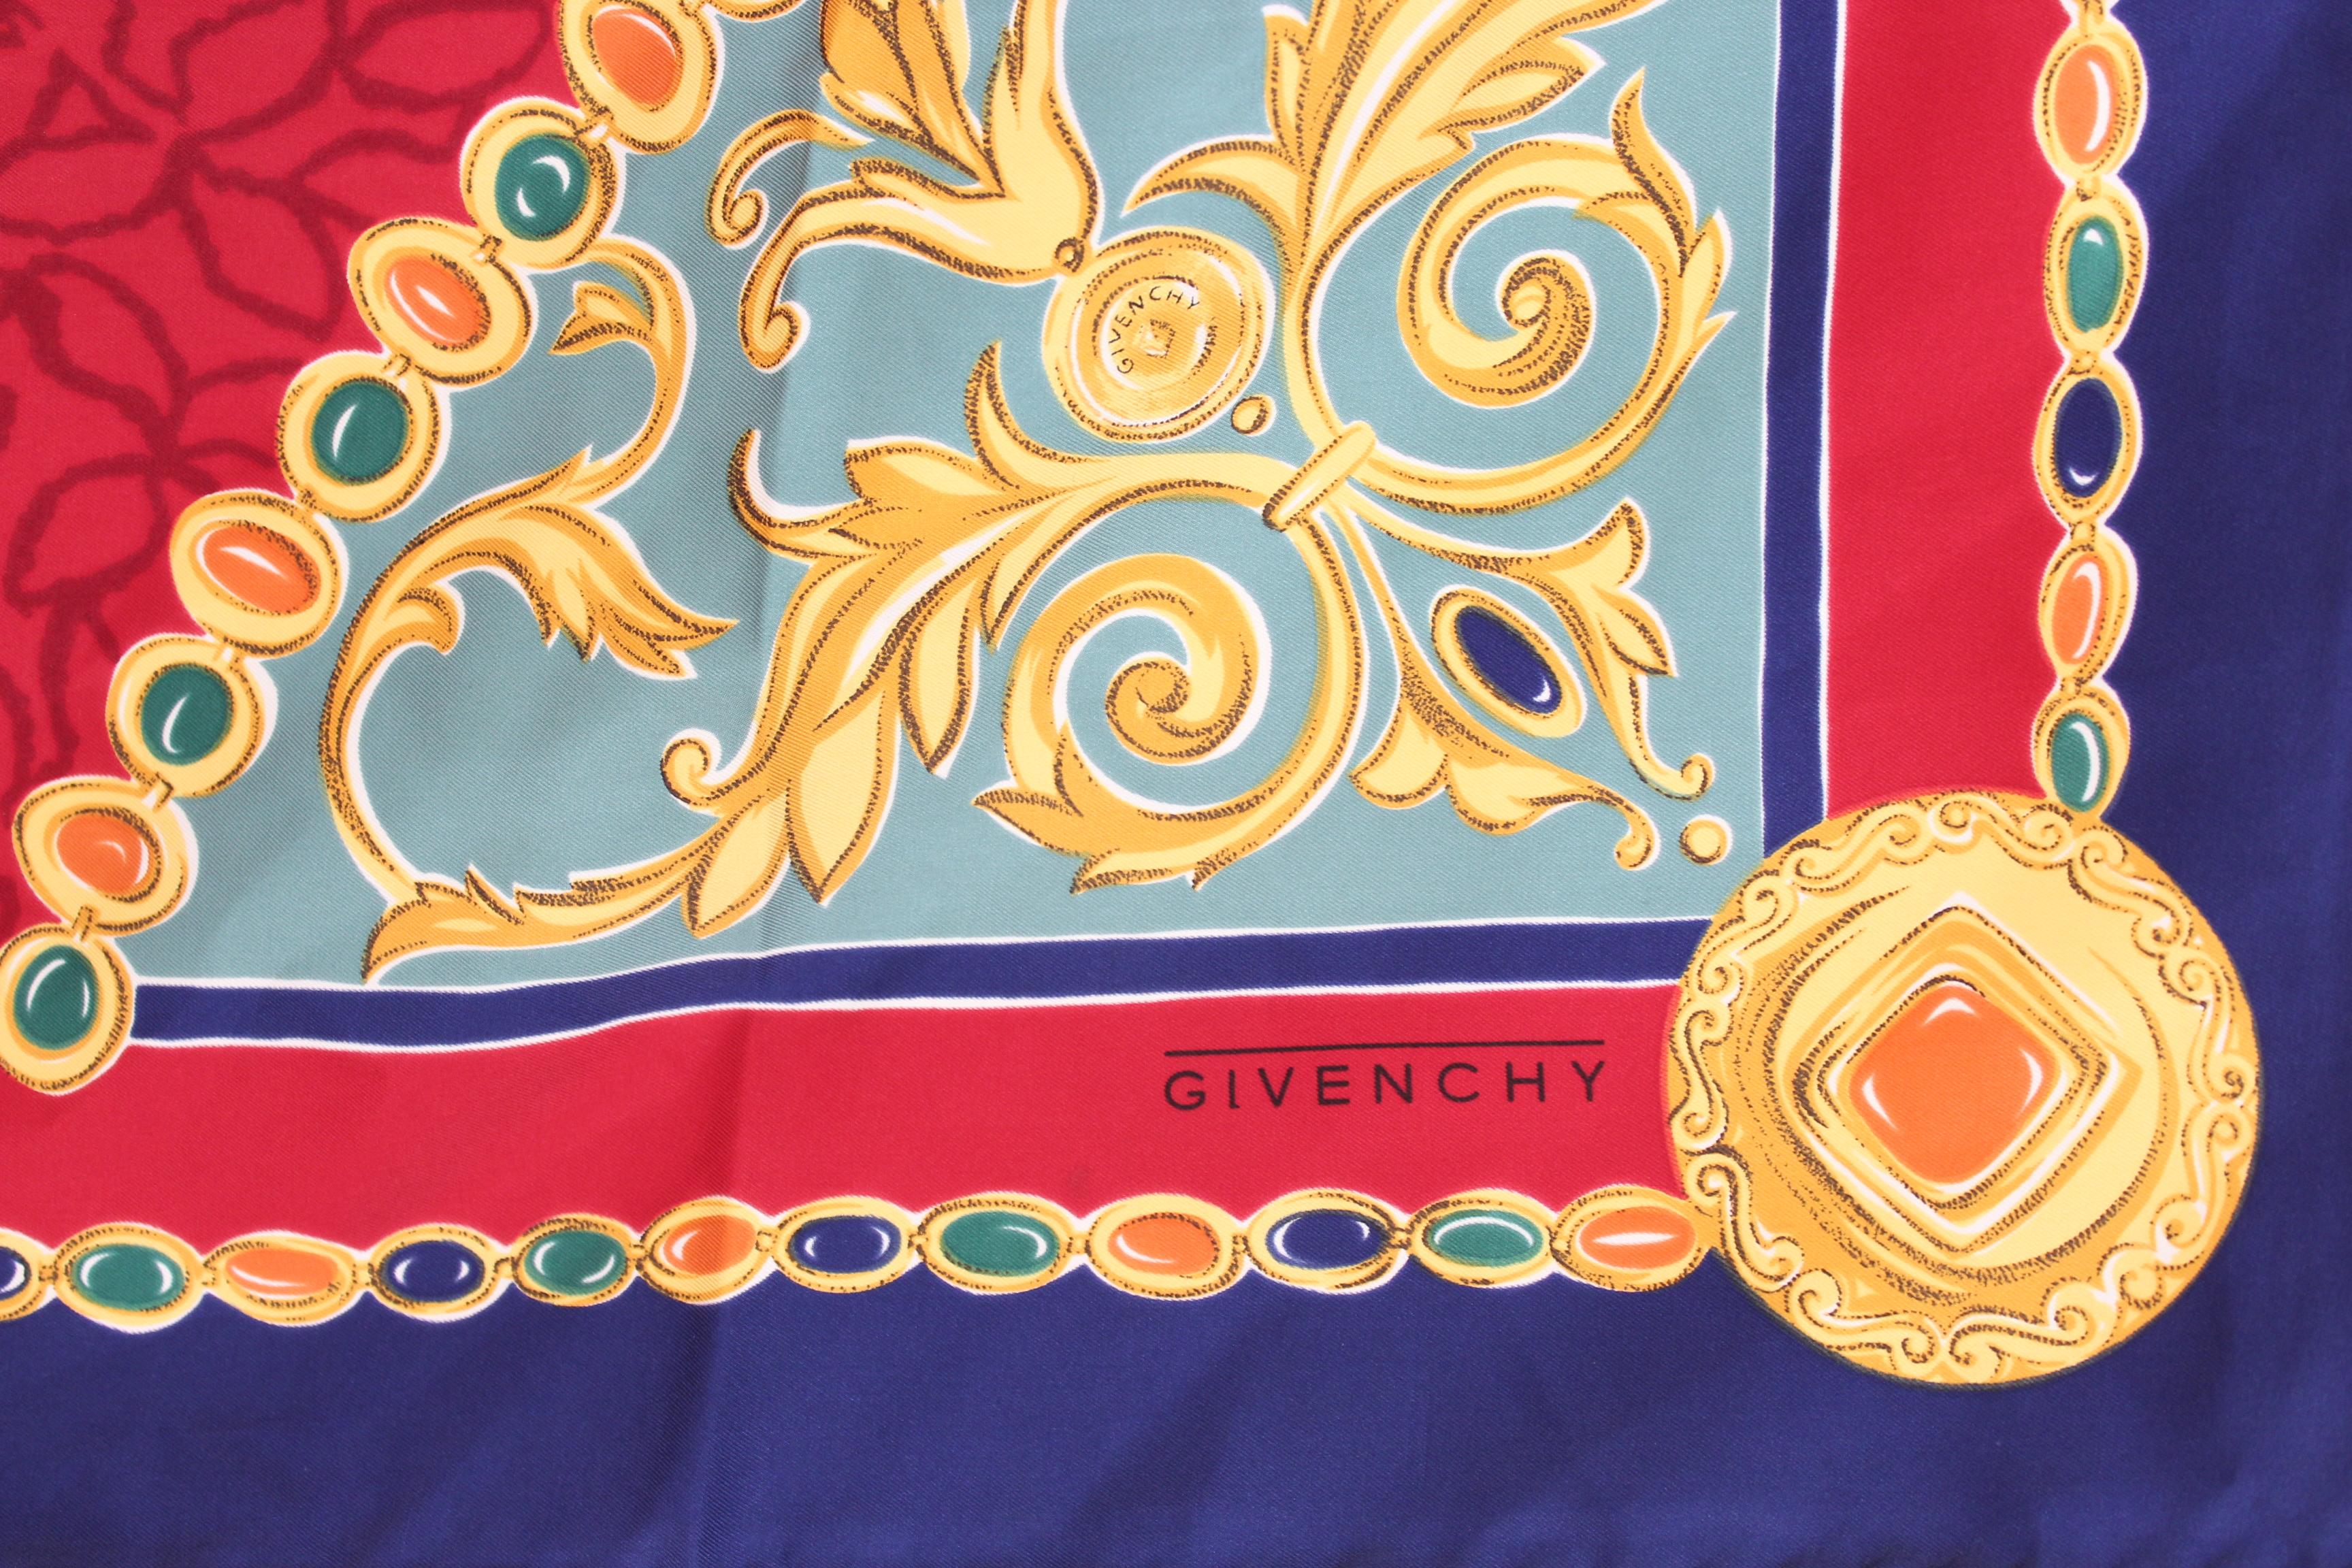 Givenchy vintage 90s foulard. Red, gold and blue color with baroque style designs. 100% silk. Made in Italy. Very good vintage condition, there is a small spot.

Measures: 88 x 88 cm

